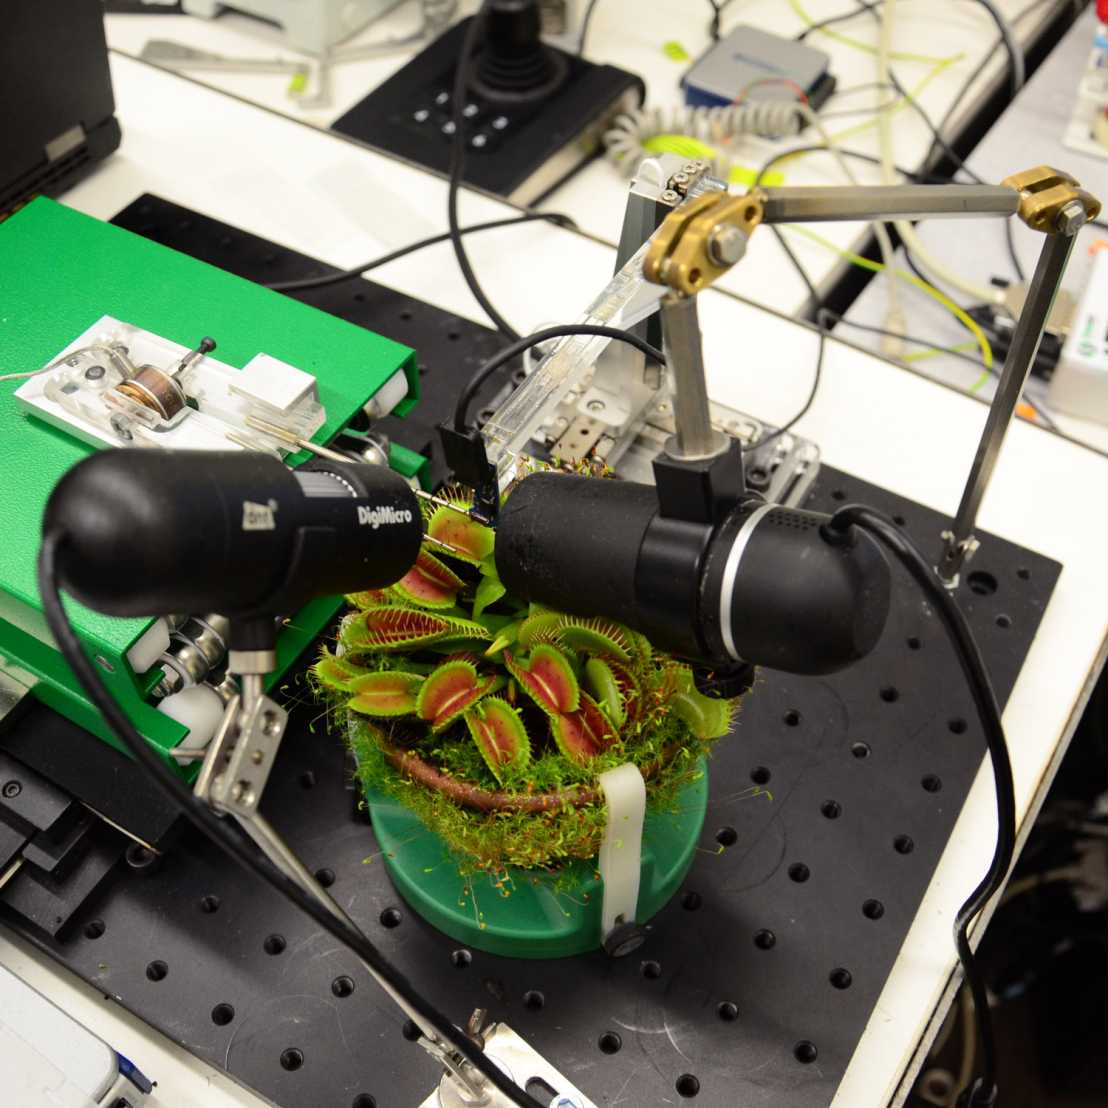 Experimental set-up with Venus flytrap, two cameras, microrobotic system, and load cell.